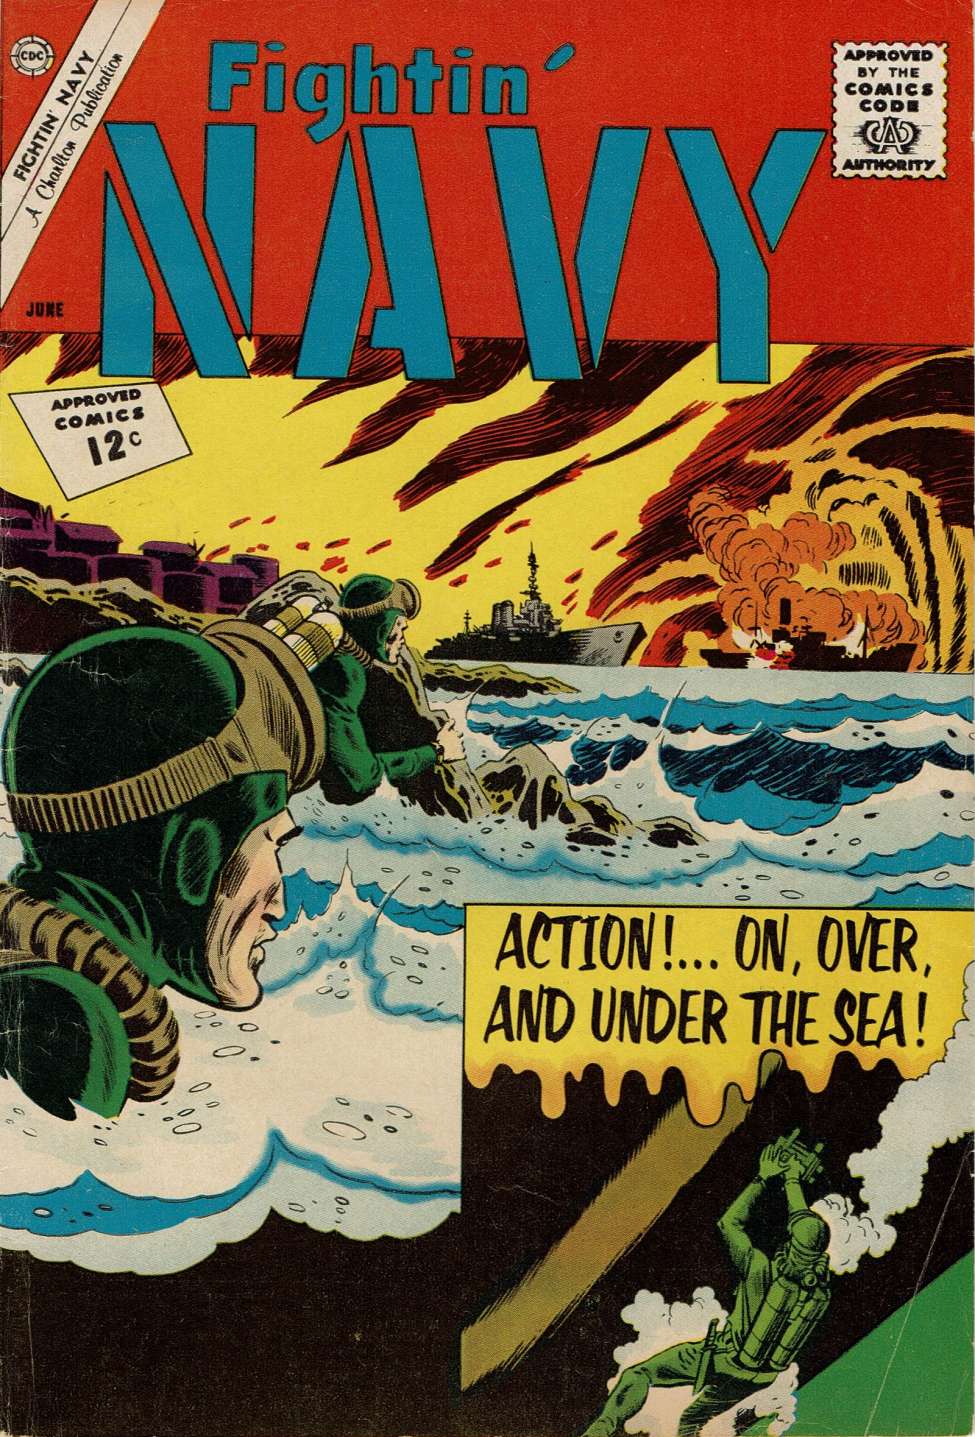 Book Cover For Fightin' Navy 104